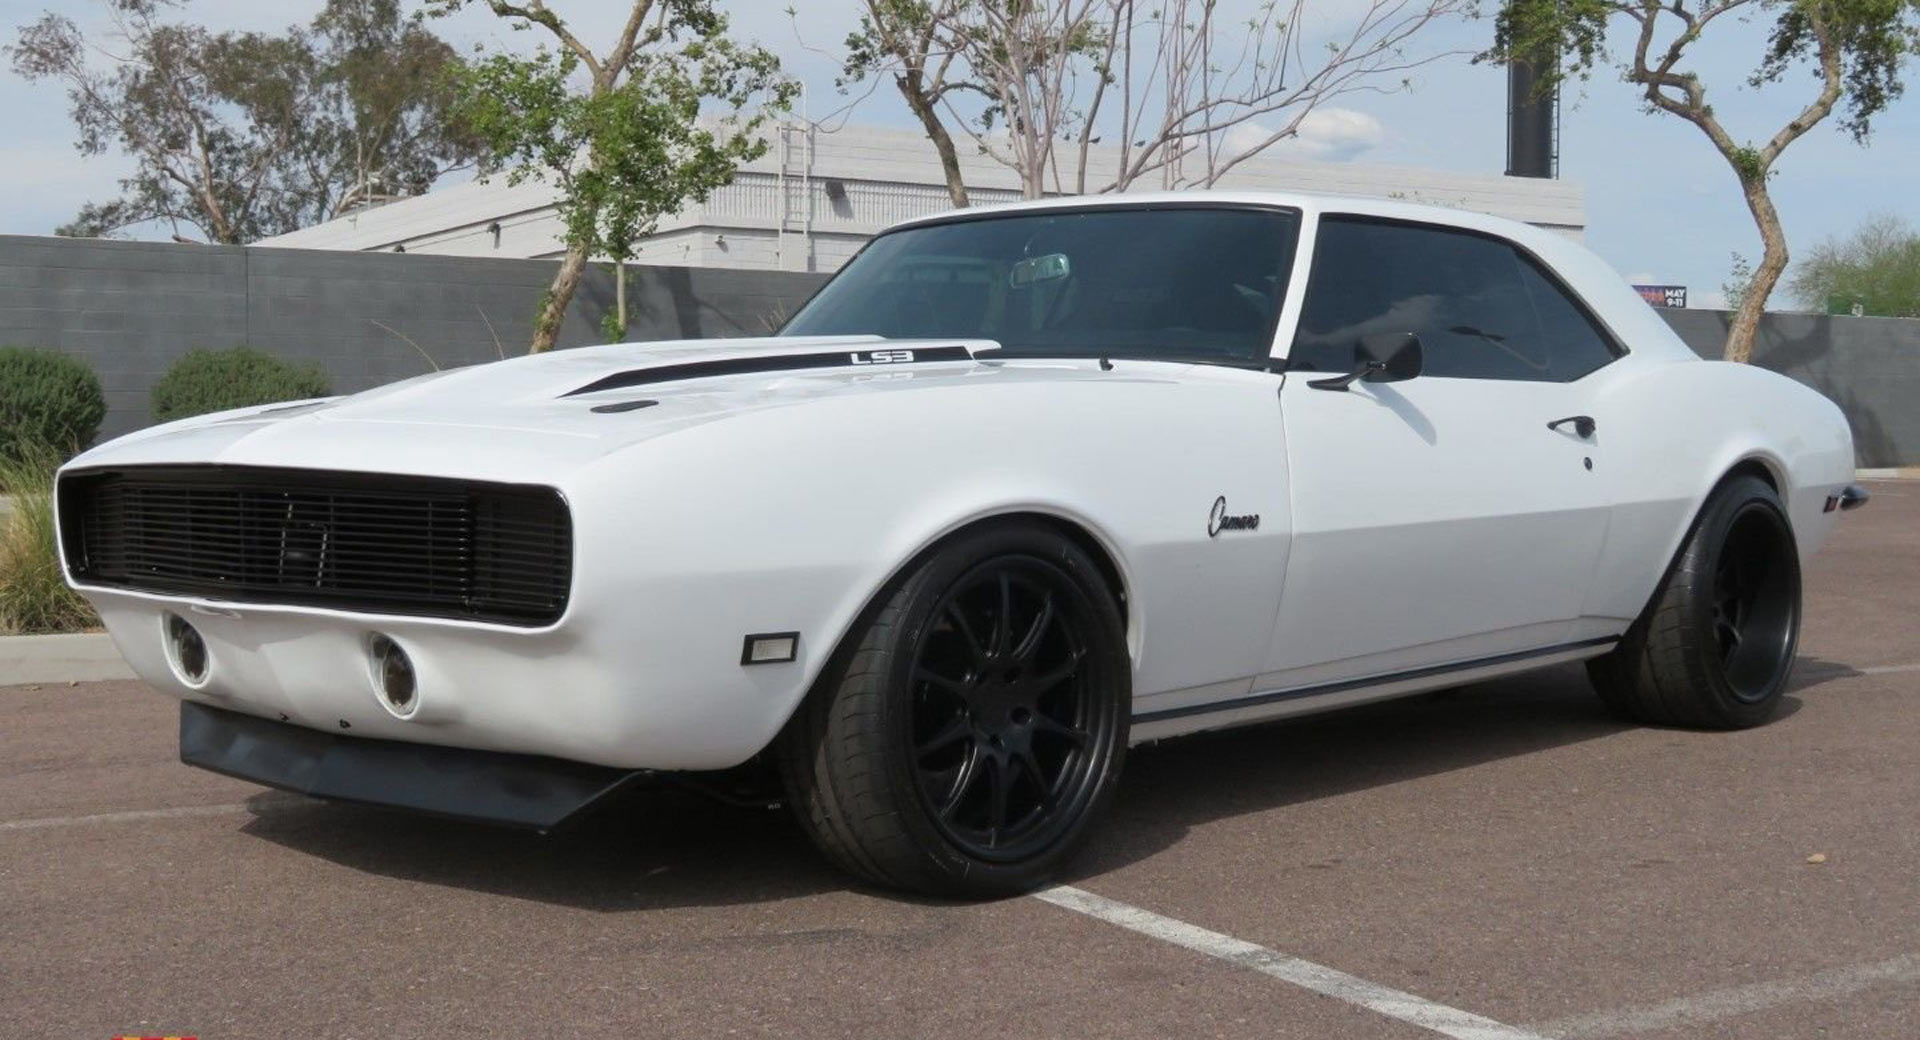 Someone Dropped Over $100k To Mod This '68 Camaro, Could Be Yours For $75k